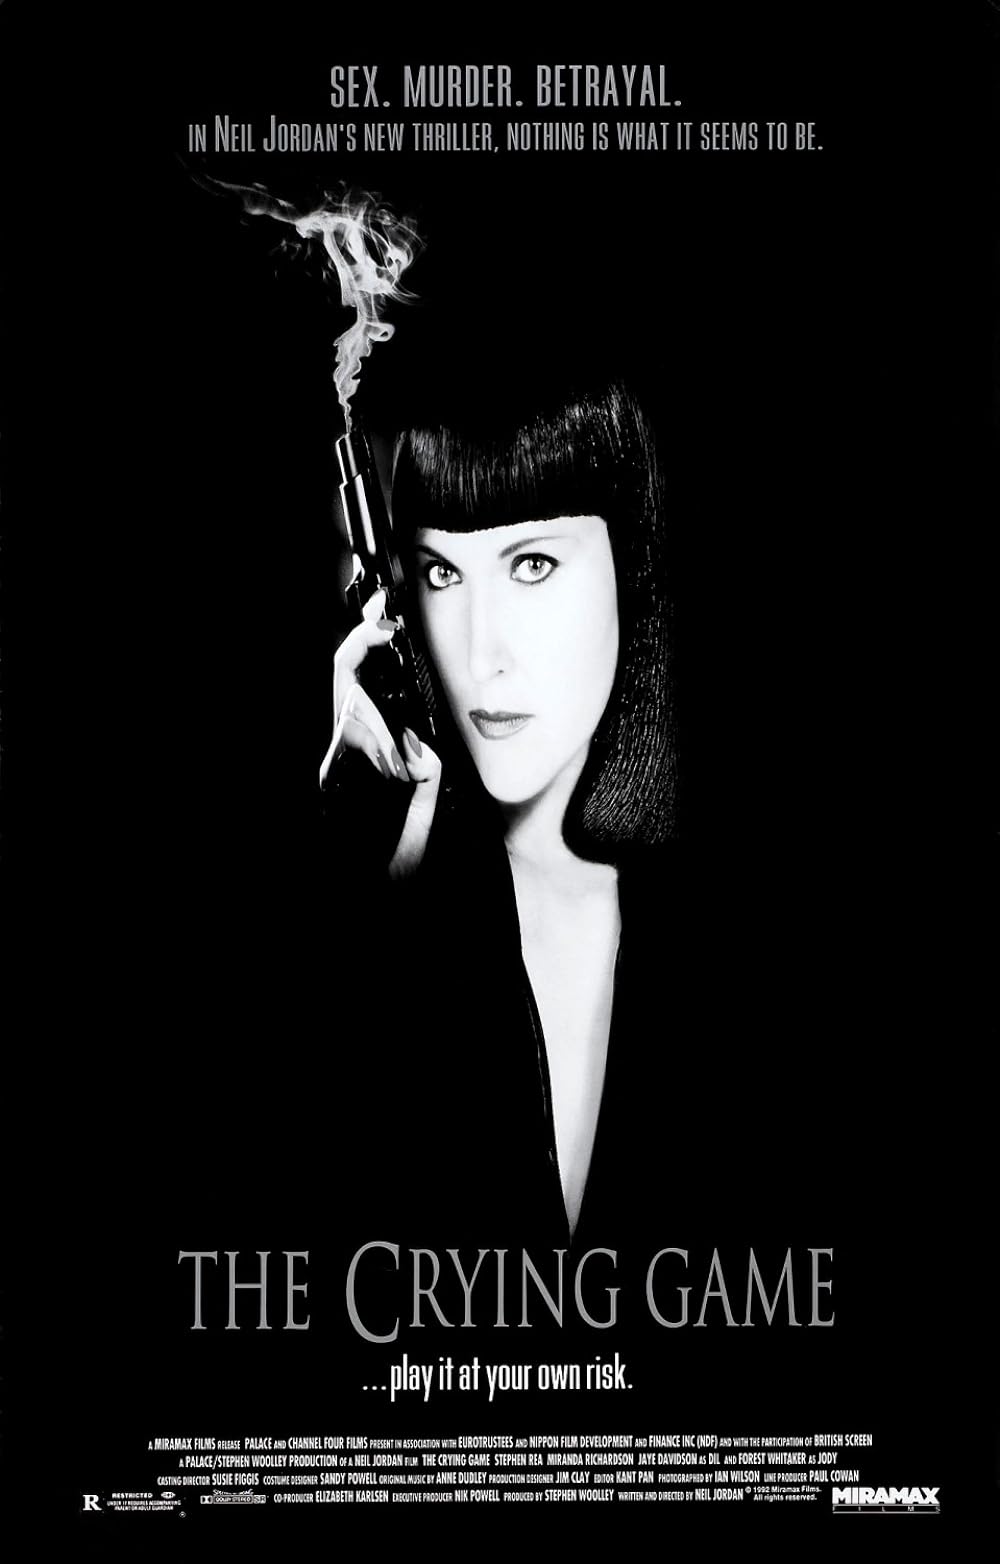 The Crying Game (1992) 192Kbps 24Fps 48Khz 2.0Ch DVD Turkish Audio TAC